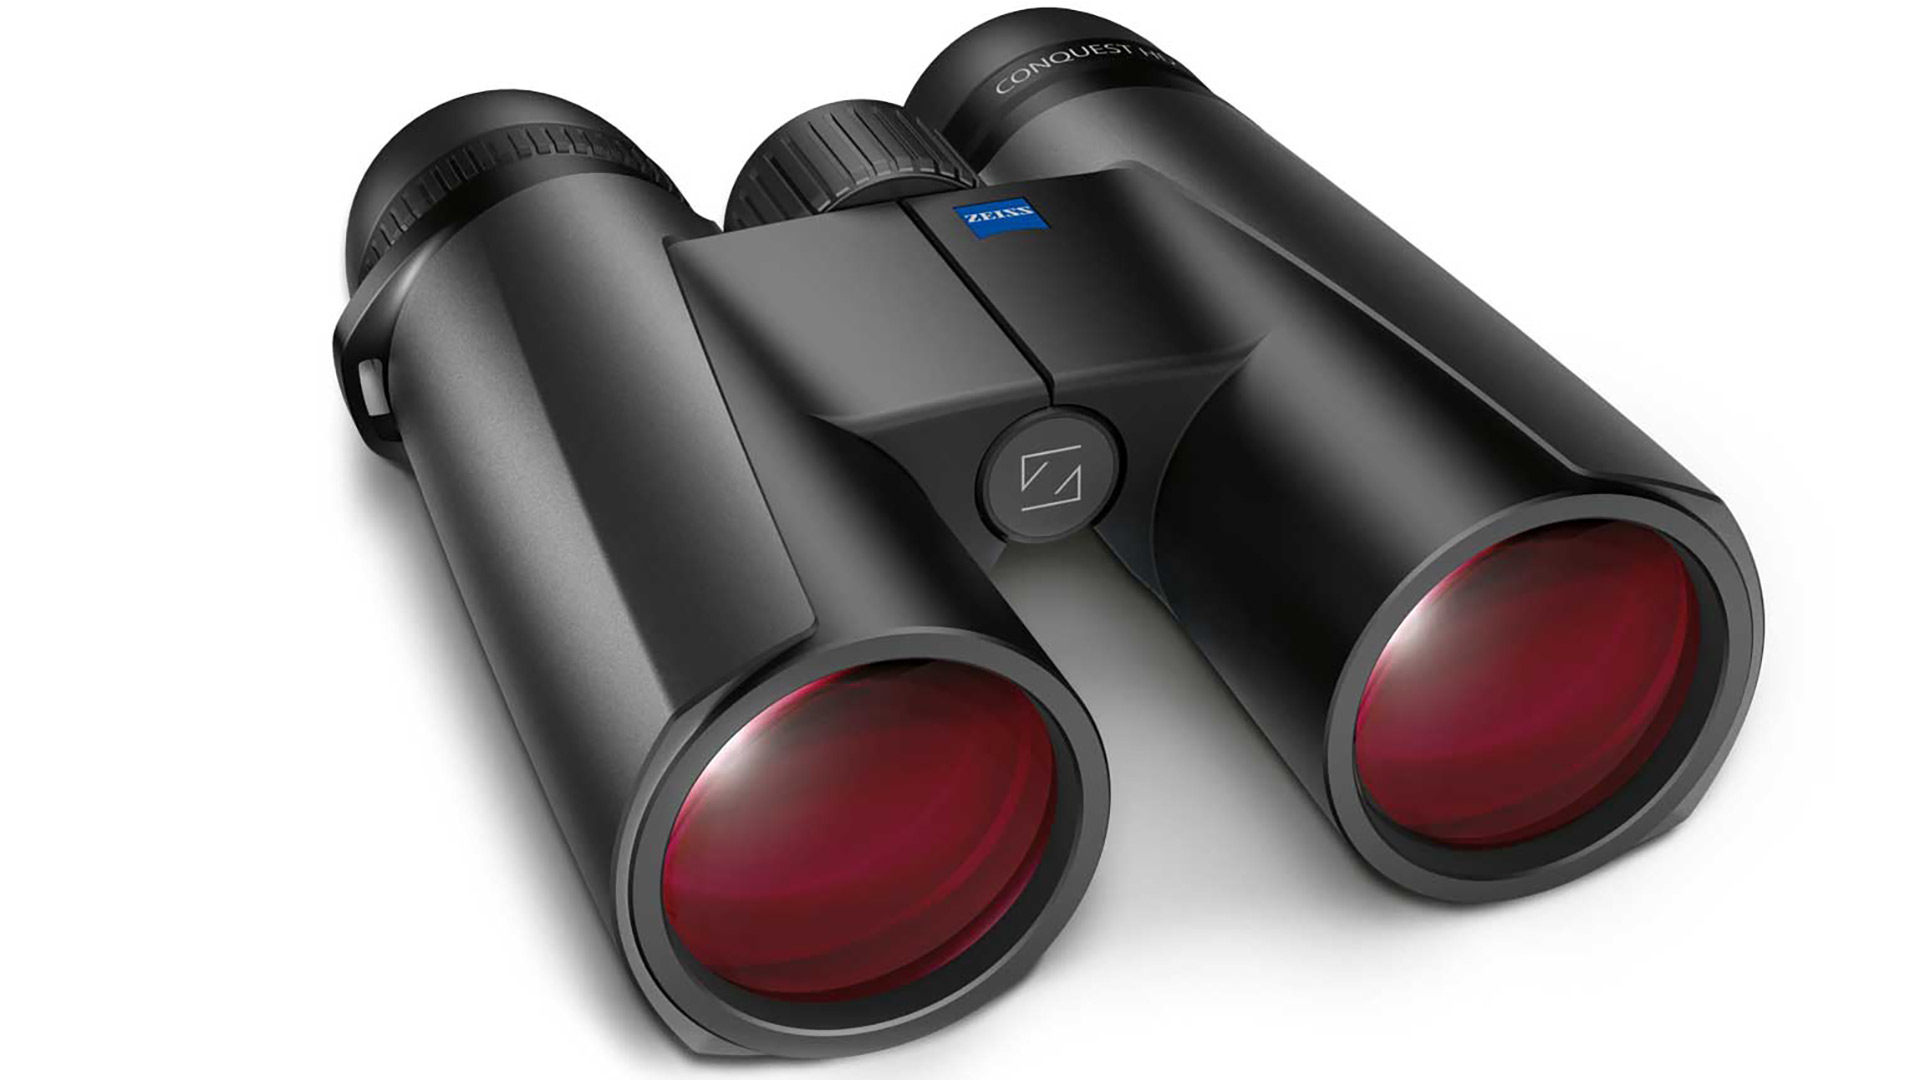 CONQUEST HD (High Definition) 8/10x42 binoculars with ED (Extralow Dispersion) glass.